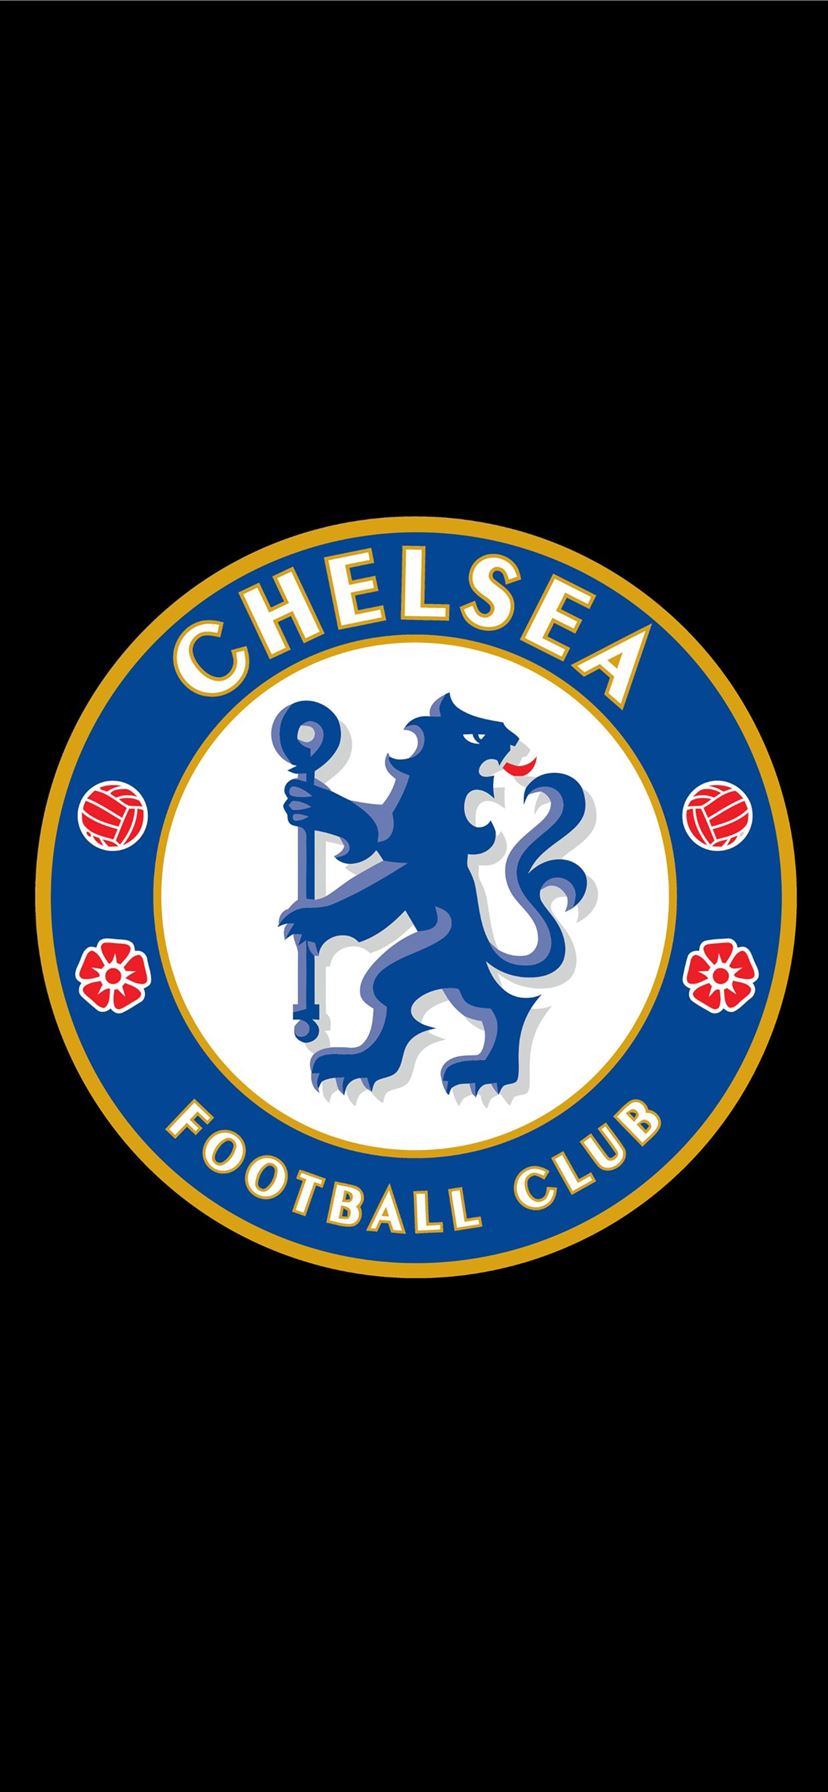 Chelsea Football Club Chelsea Fc Hd Backgrounds Iphone X Wallpapers Free Download